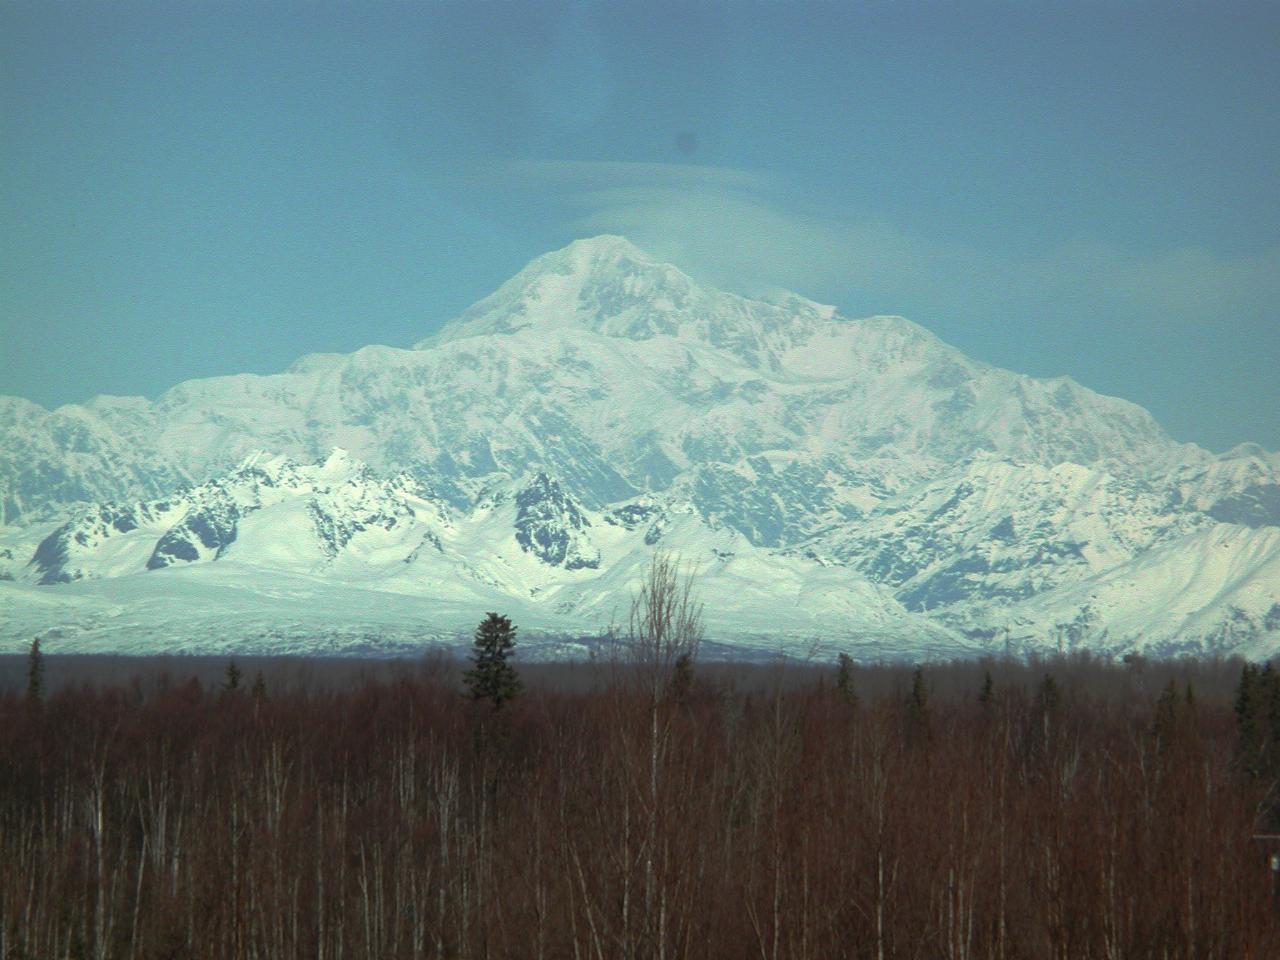 Mt. McKinley as seen from just before Talkeetna